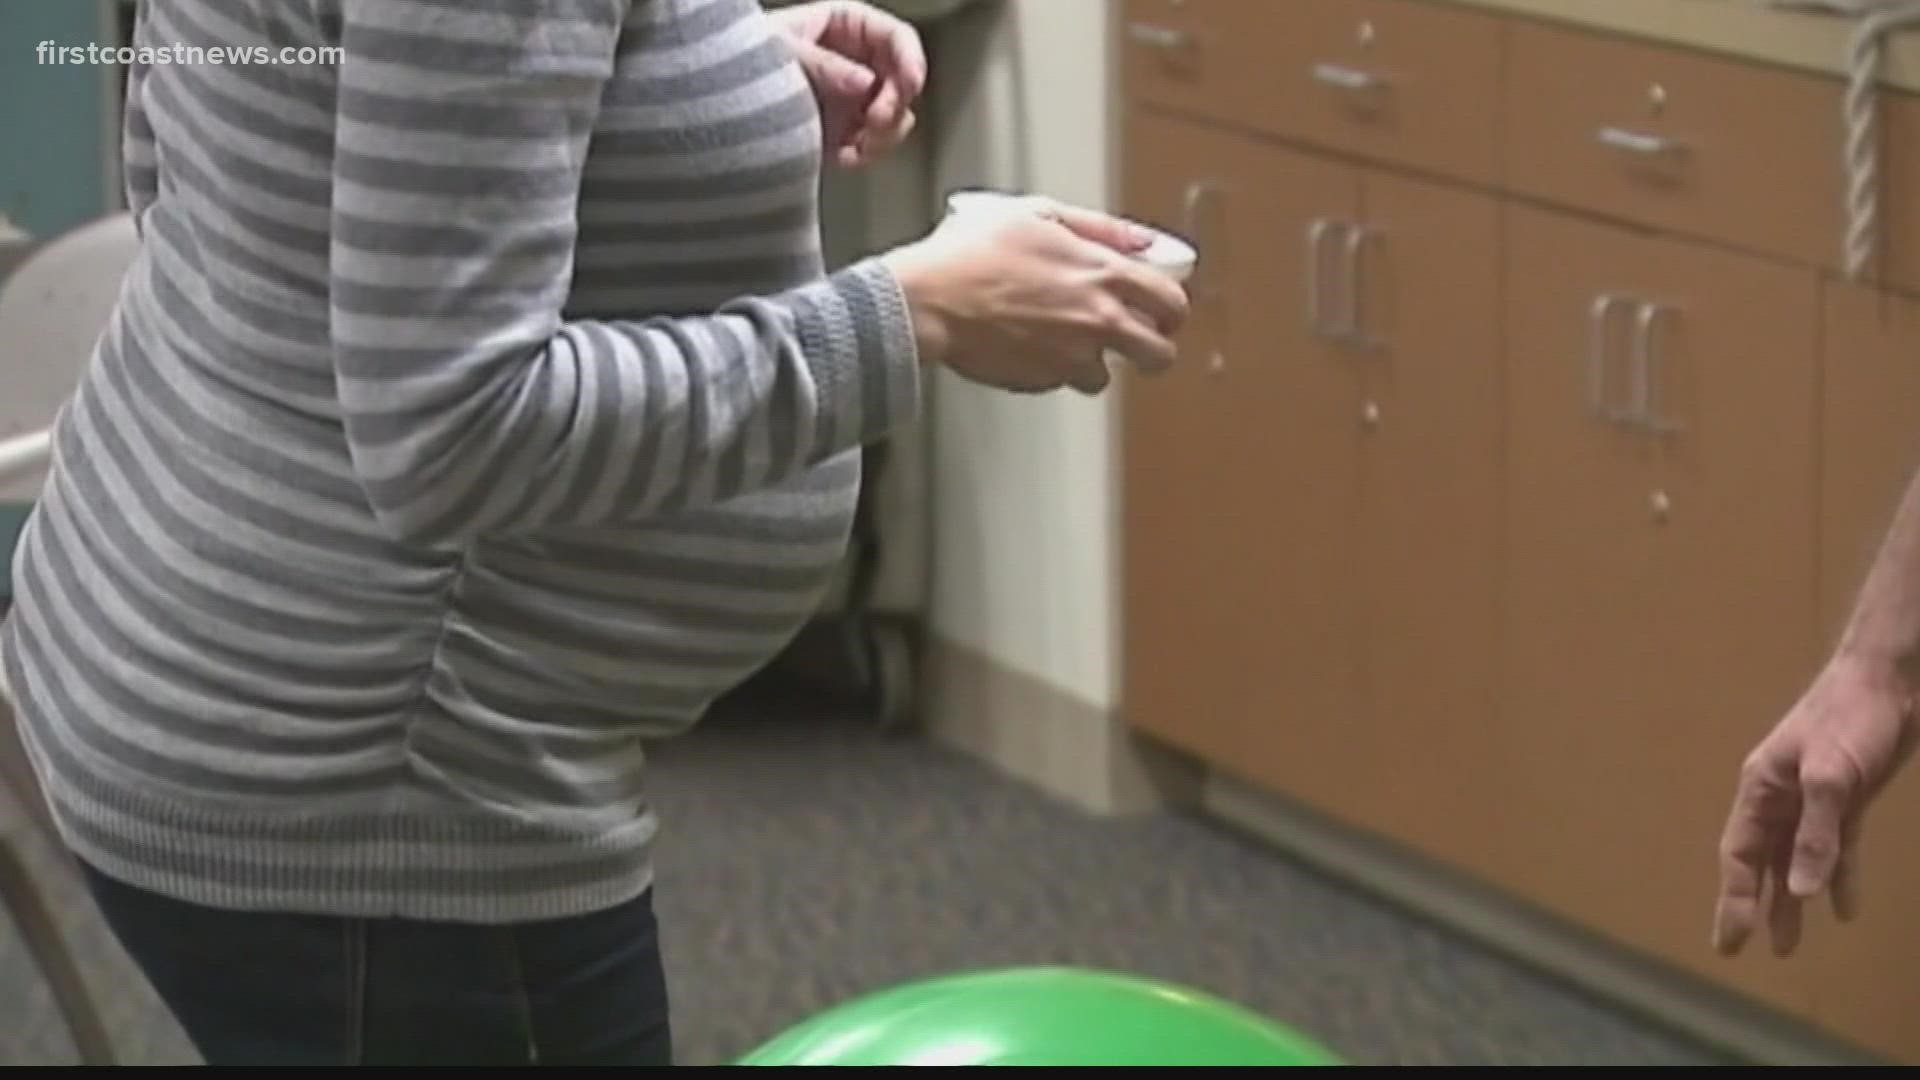 A new CDC study looked at 2,500 pregnant women who got the Pfizer or Moderna vaccine before 20 weeks in their pregnancy.